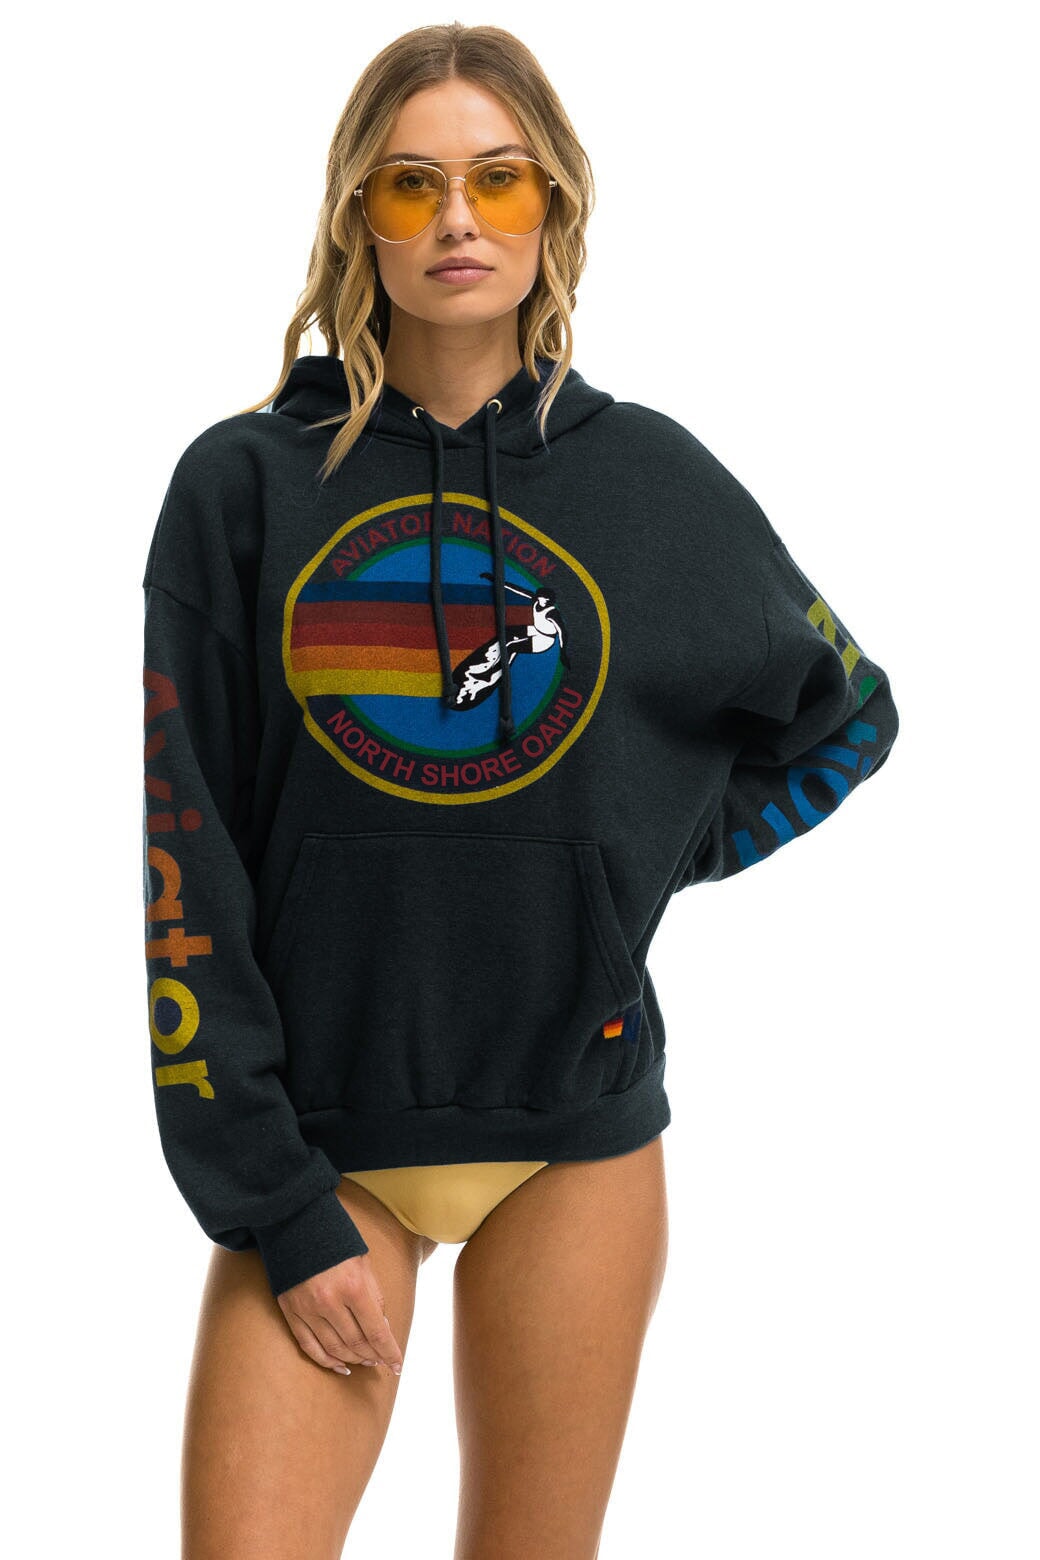 AVIATOR NATION NORTH SHORE RELAXED PULLOVER HOODIE - CHARCOAL Hoodie Aviator Nation 